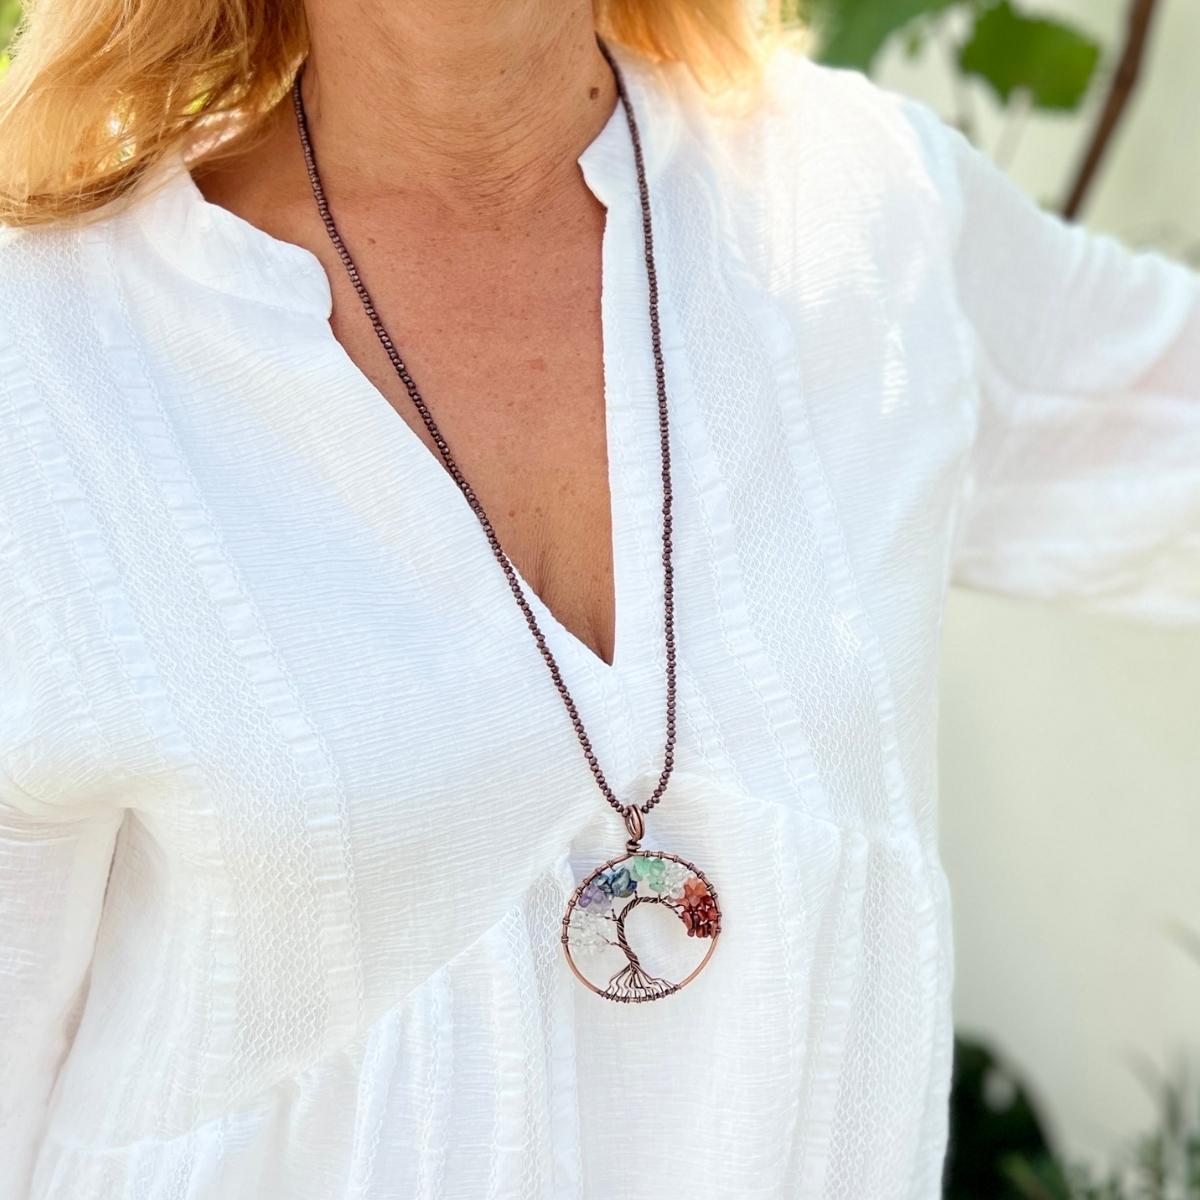 "Chakra Harmony Tree" is a captivating and spiritually meaningful necklace that celebrates the balance and alignment of the body's energy centers, known as the chakras.